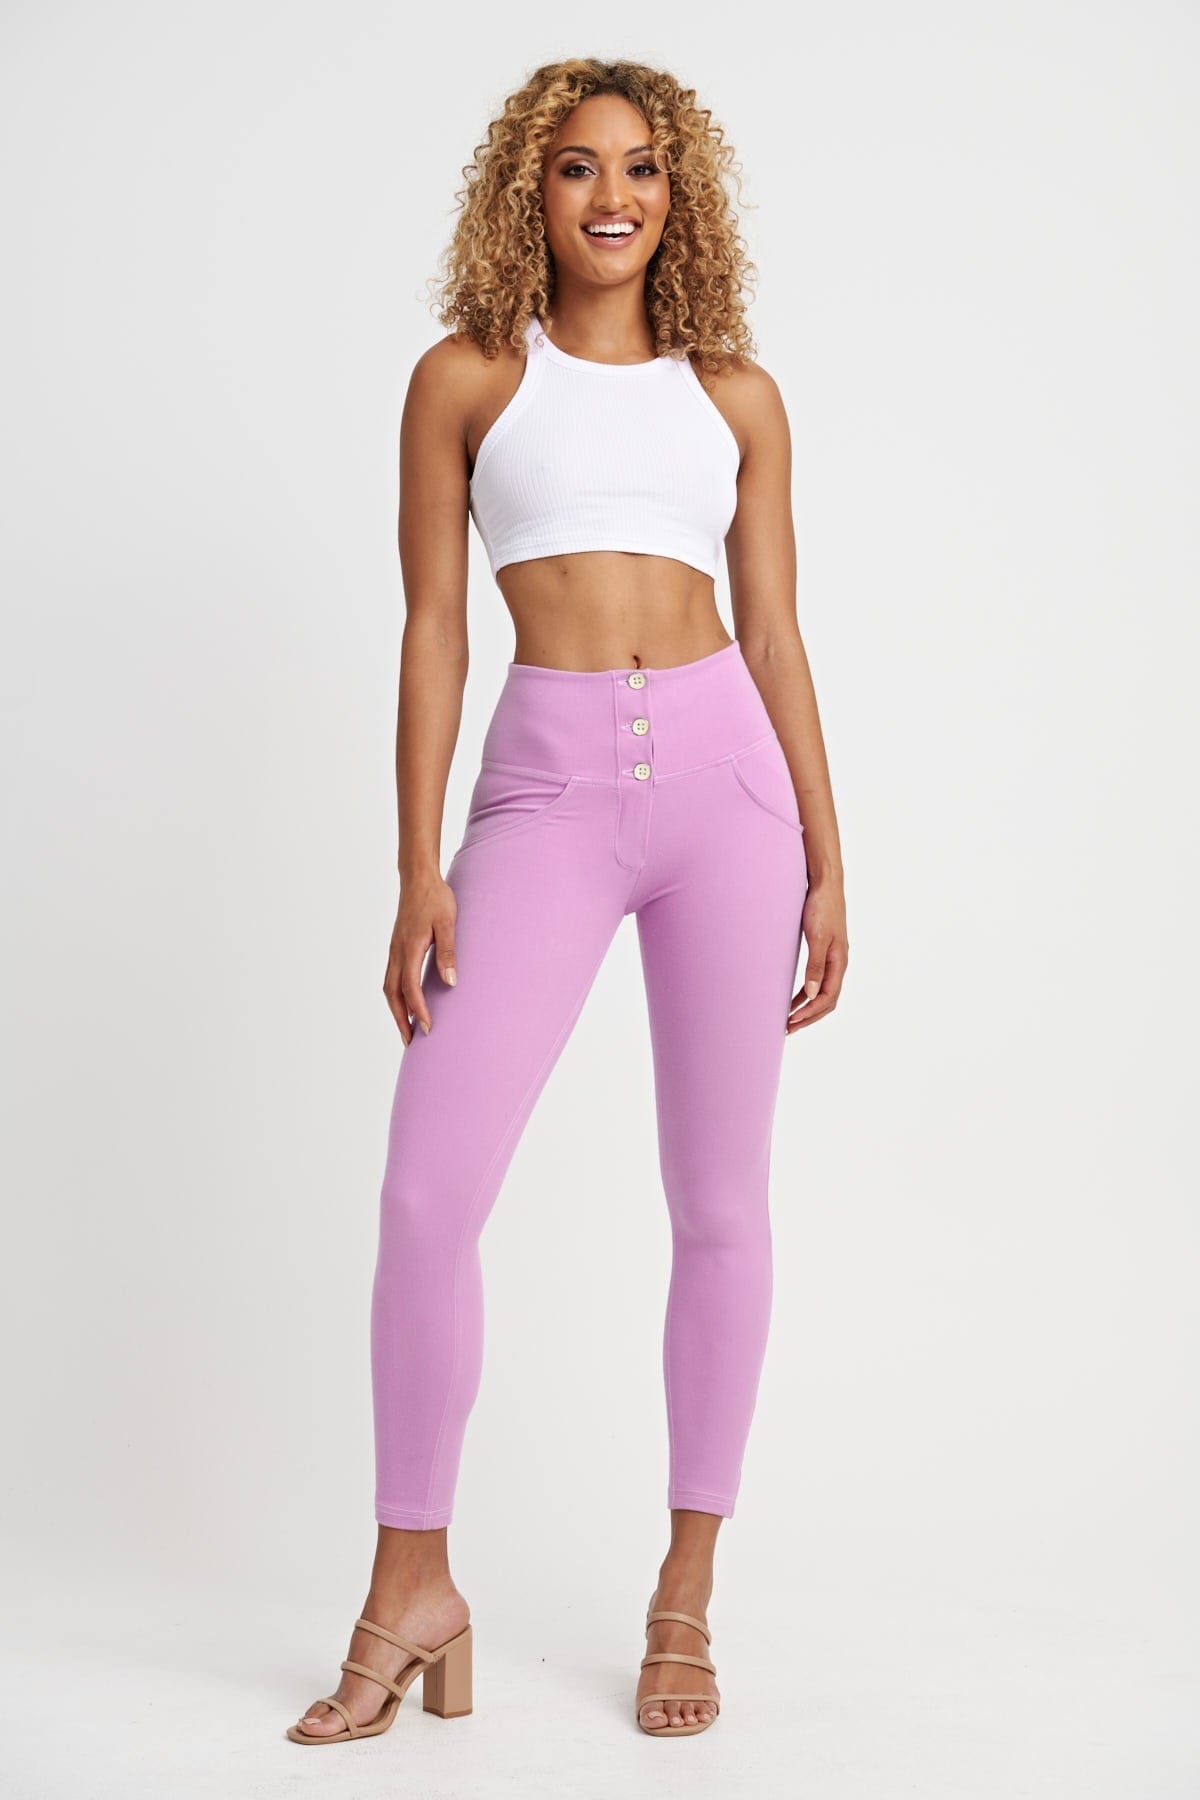 WR.UP® Drill Limited Edition - High Waisted - 7/8 Length - Lilac 2